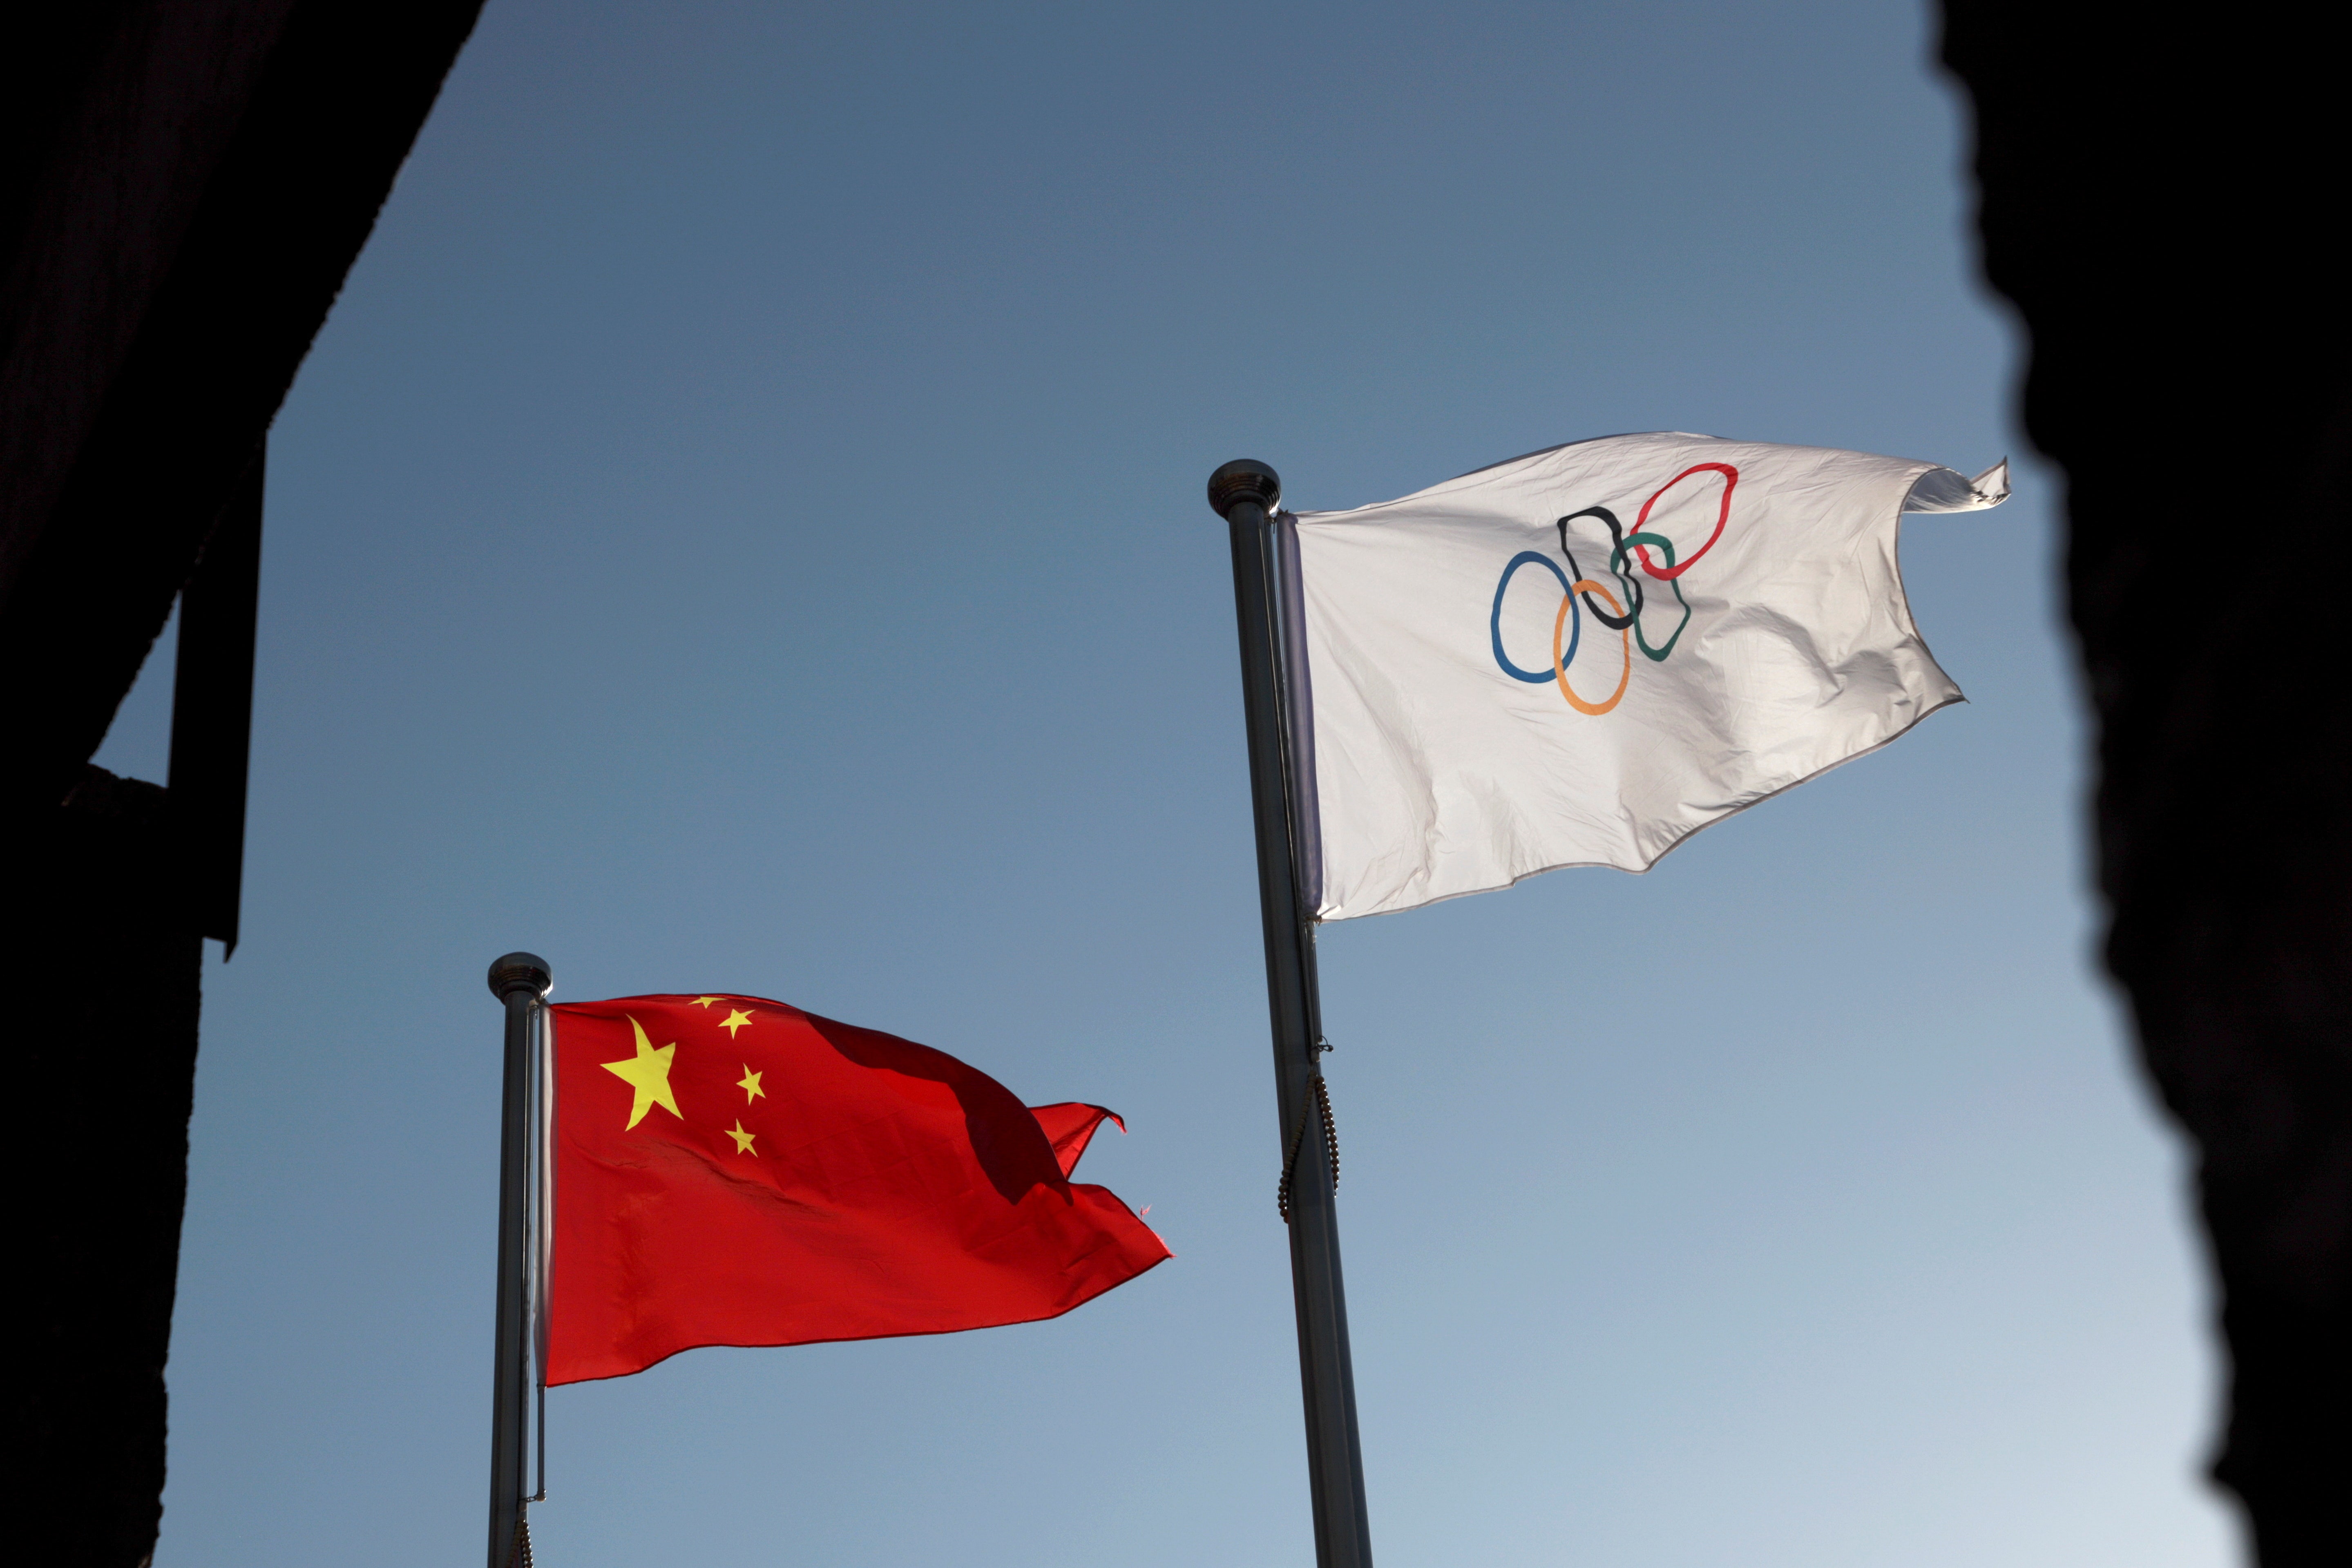 Top advertisers for Beijing Winter Olympics face pressure over China human rights abuses